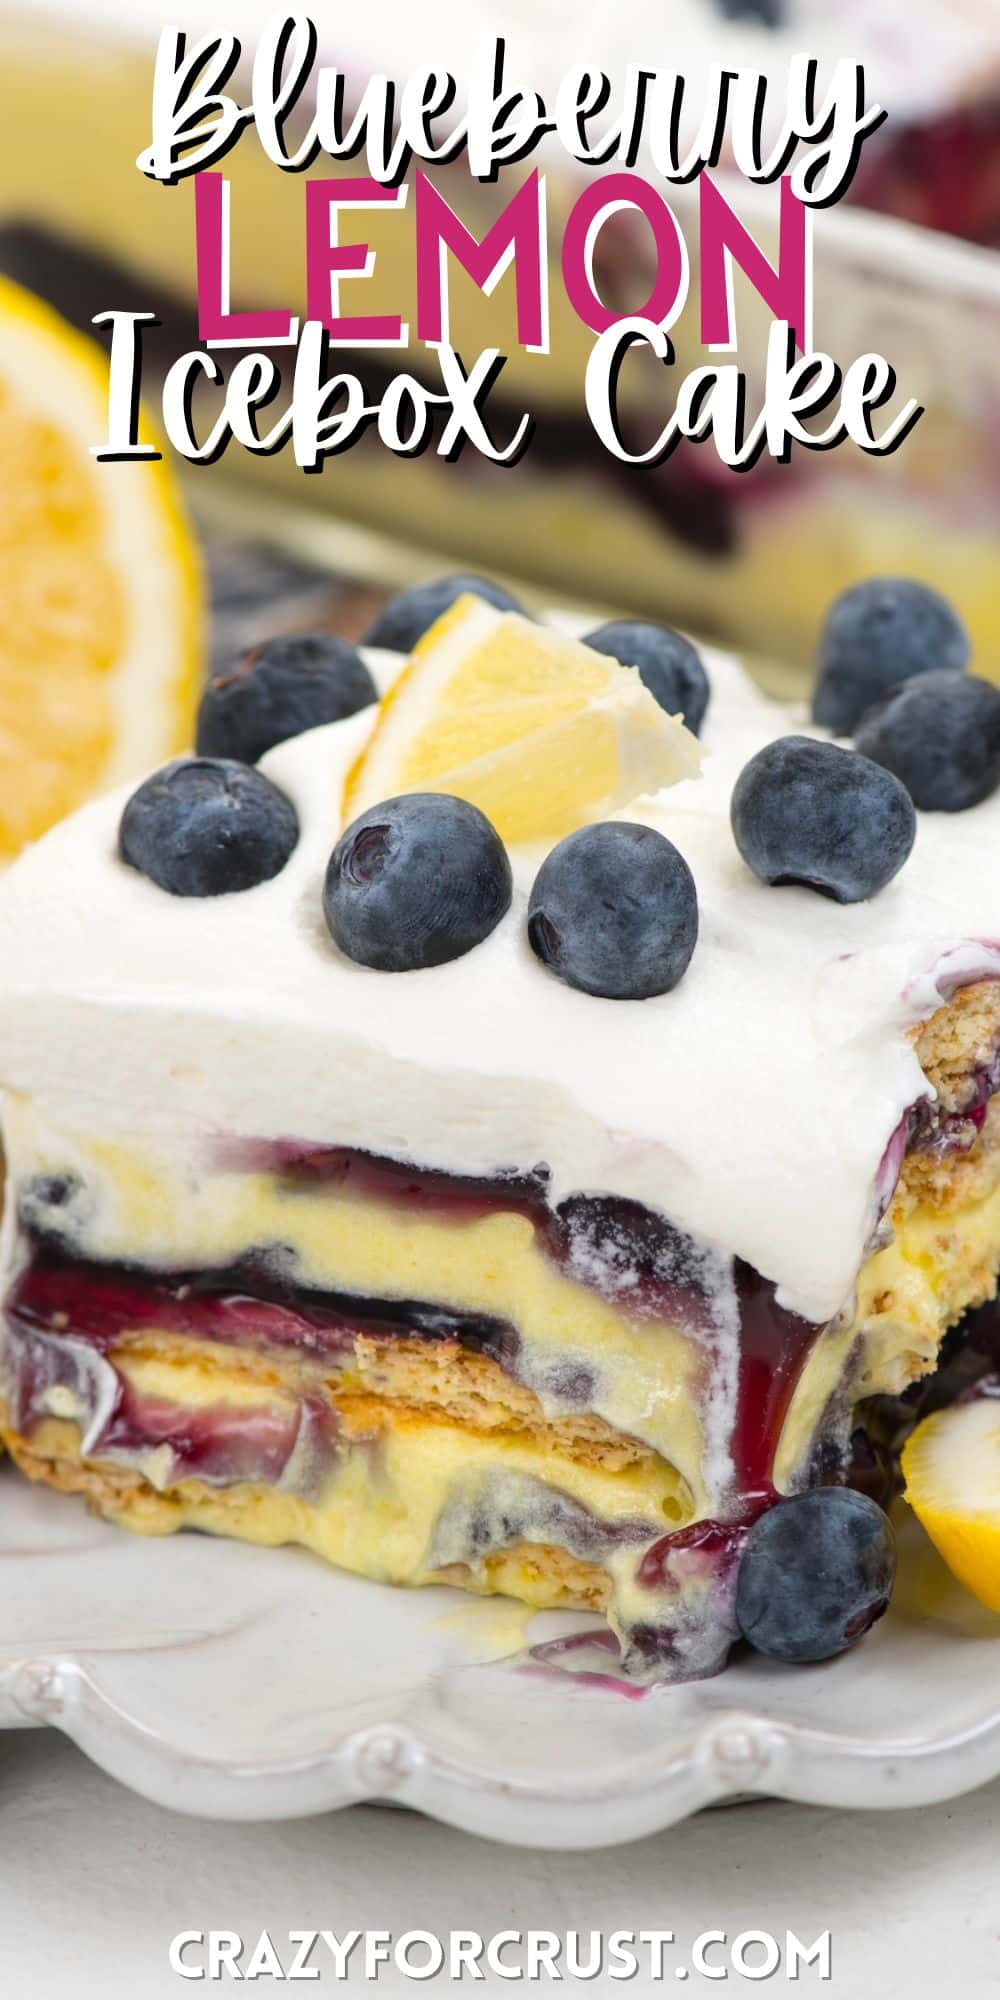 square slice of cake with blueberries and lemons on top with words on the image.